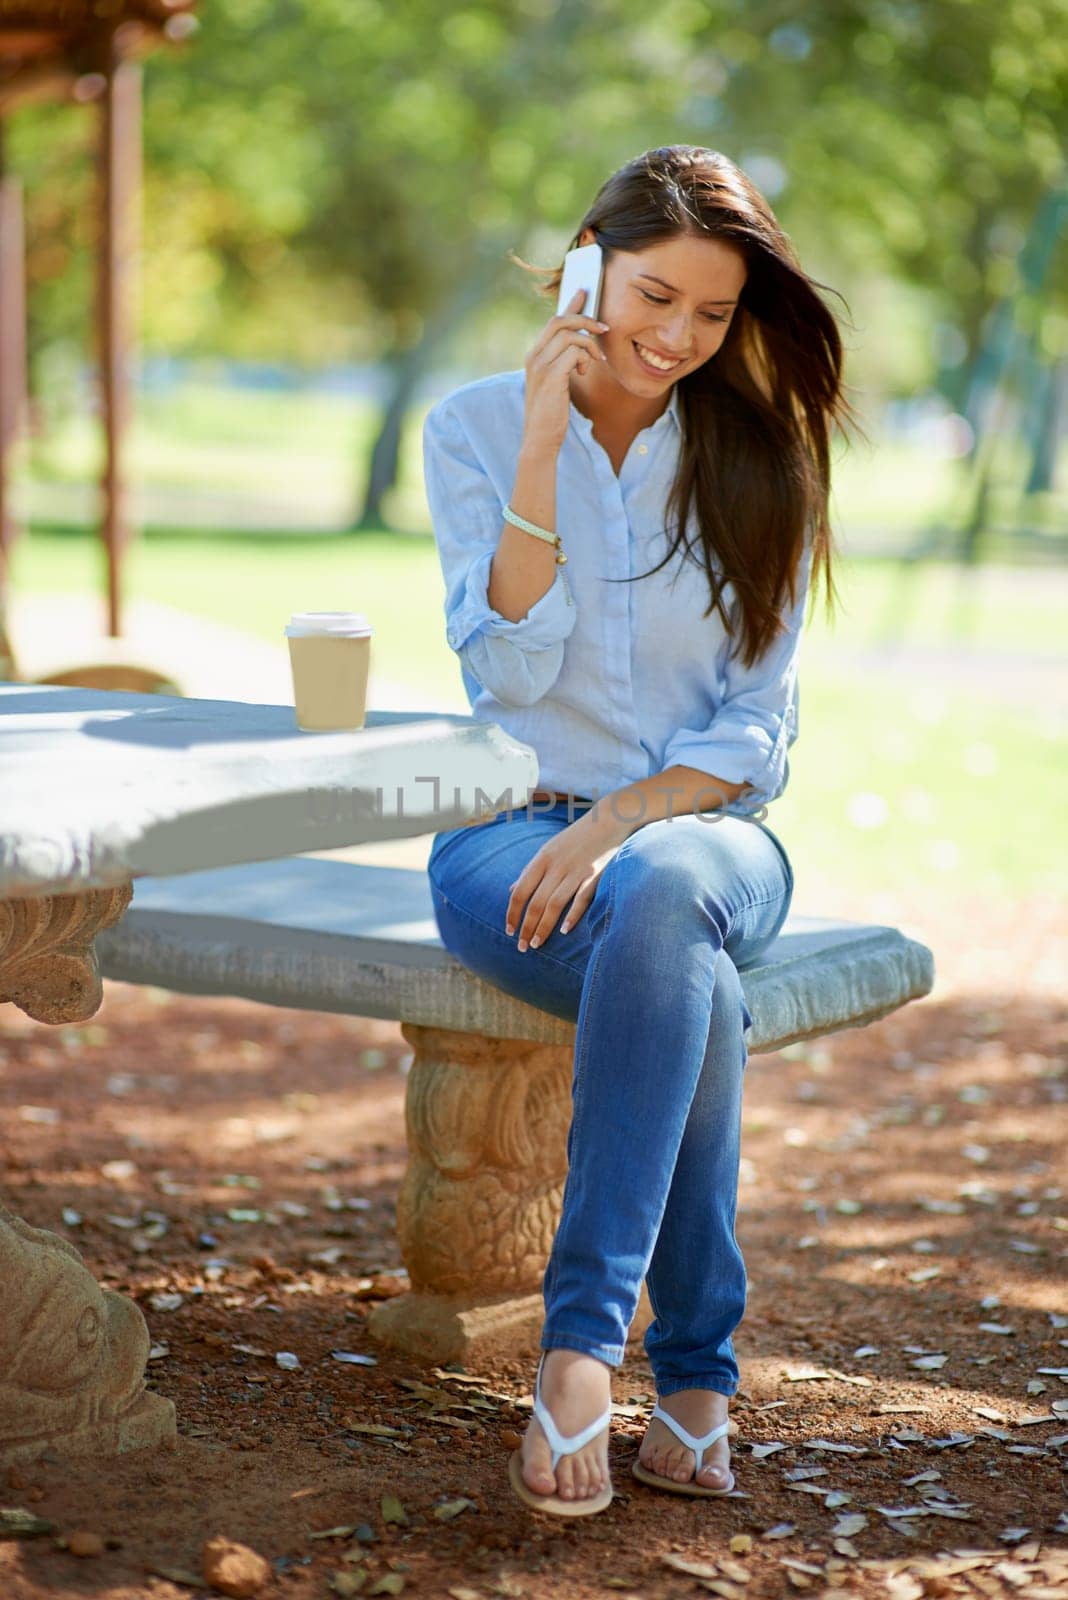 Woman, cellphone and phone call with smile, garden and nature with summer communication. Student, conversation and discussion with happiness, sunshine and rest with technology for speaking to people.